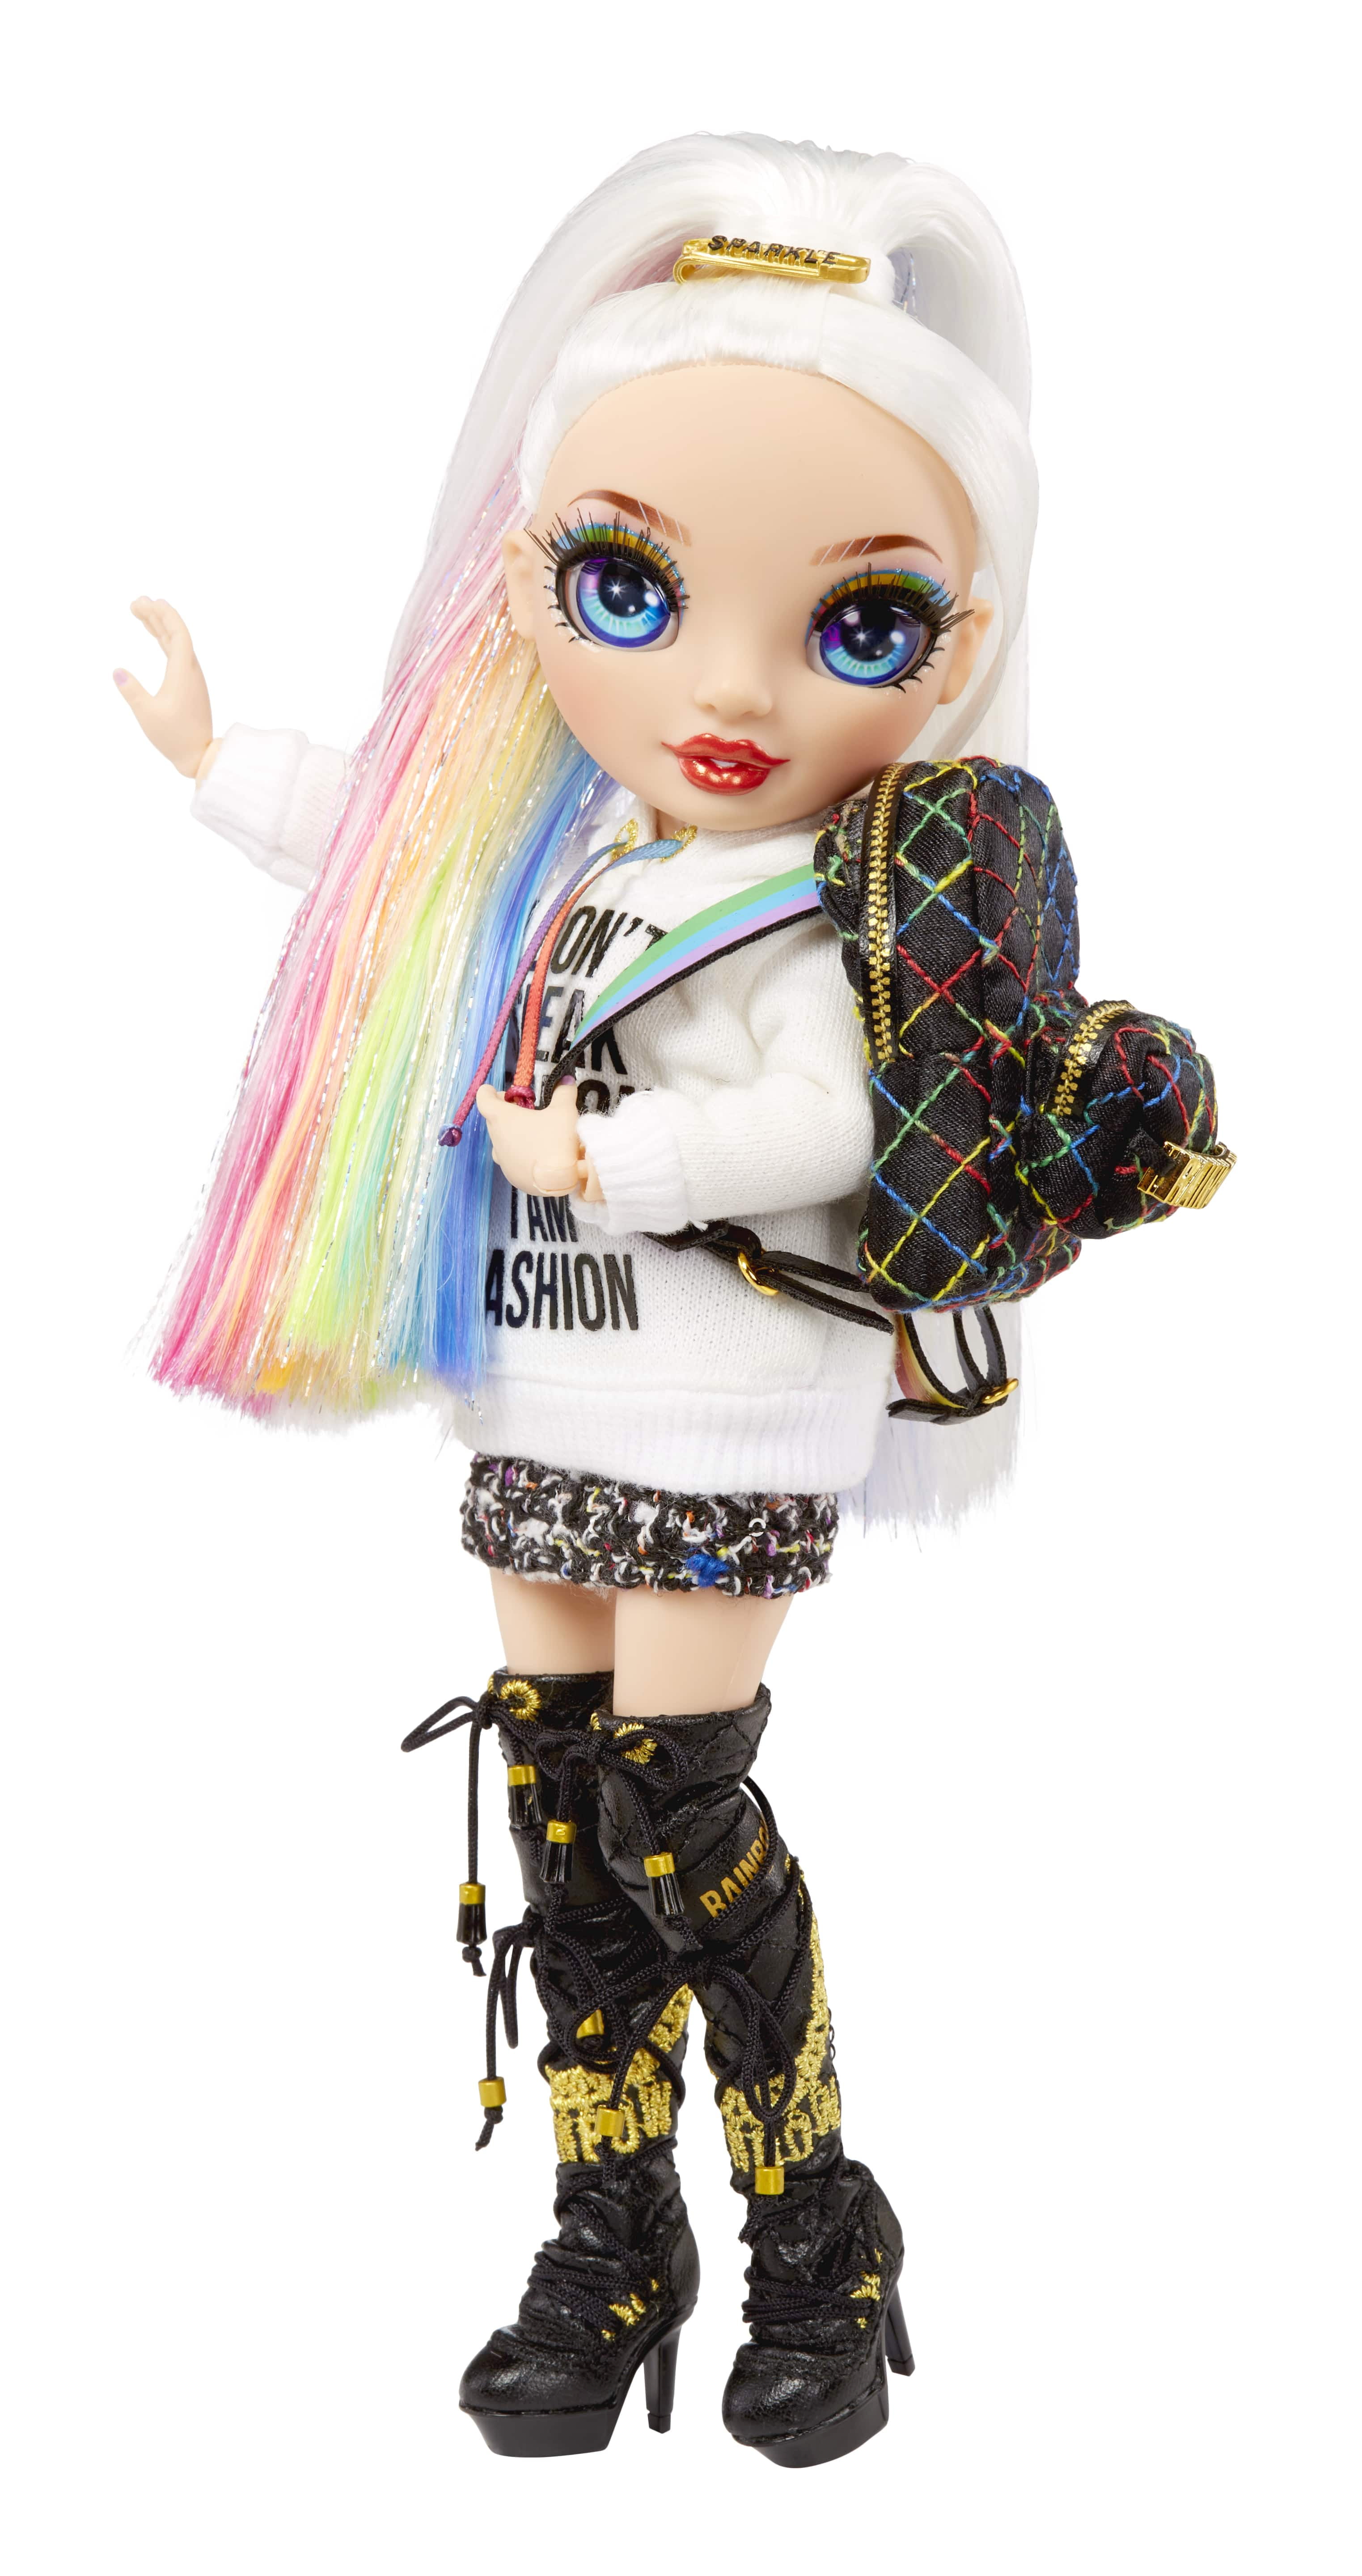 Rainbow High Jr High Amaya Raine- 9-inch Rainbow Fashion Doll with Doll  Accessories- Open and Closes Backpack. Gift for Kids 6-12 Years Old and  Collectors 